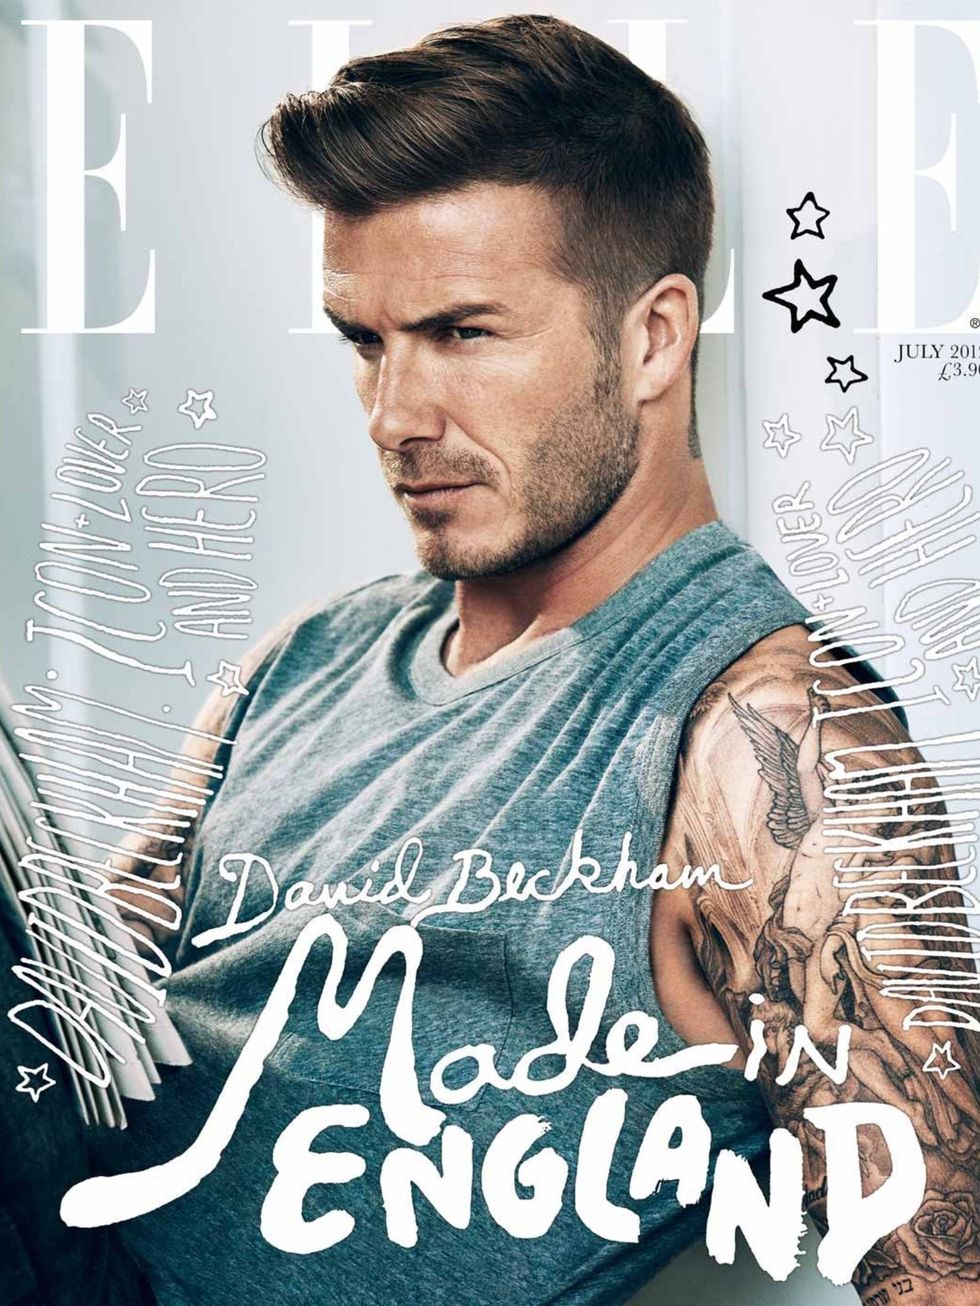 <p>Would it be uncouth to say, hubba hubba?</p><p><em><a href="http://www.elleuk.com/star-style/news/the-david-beckham-shoot2">David Beckham</a>, ELLEs first male cover star, July 2012 issue</em></p>